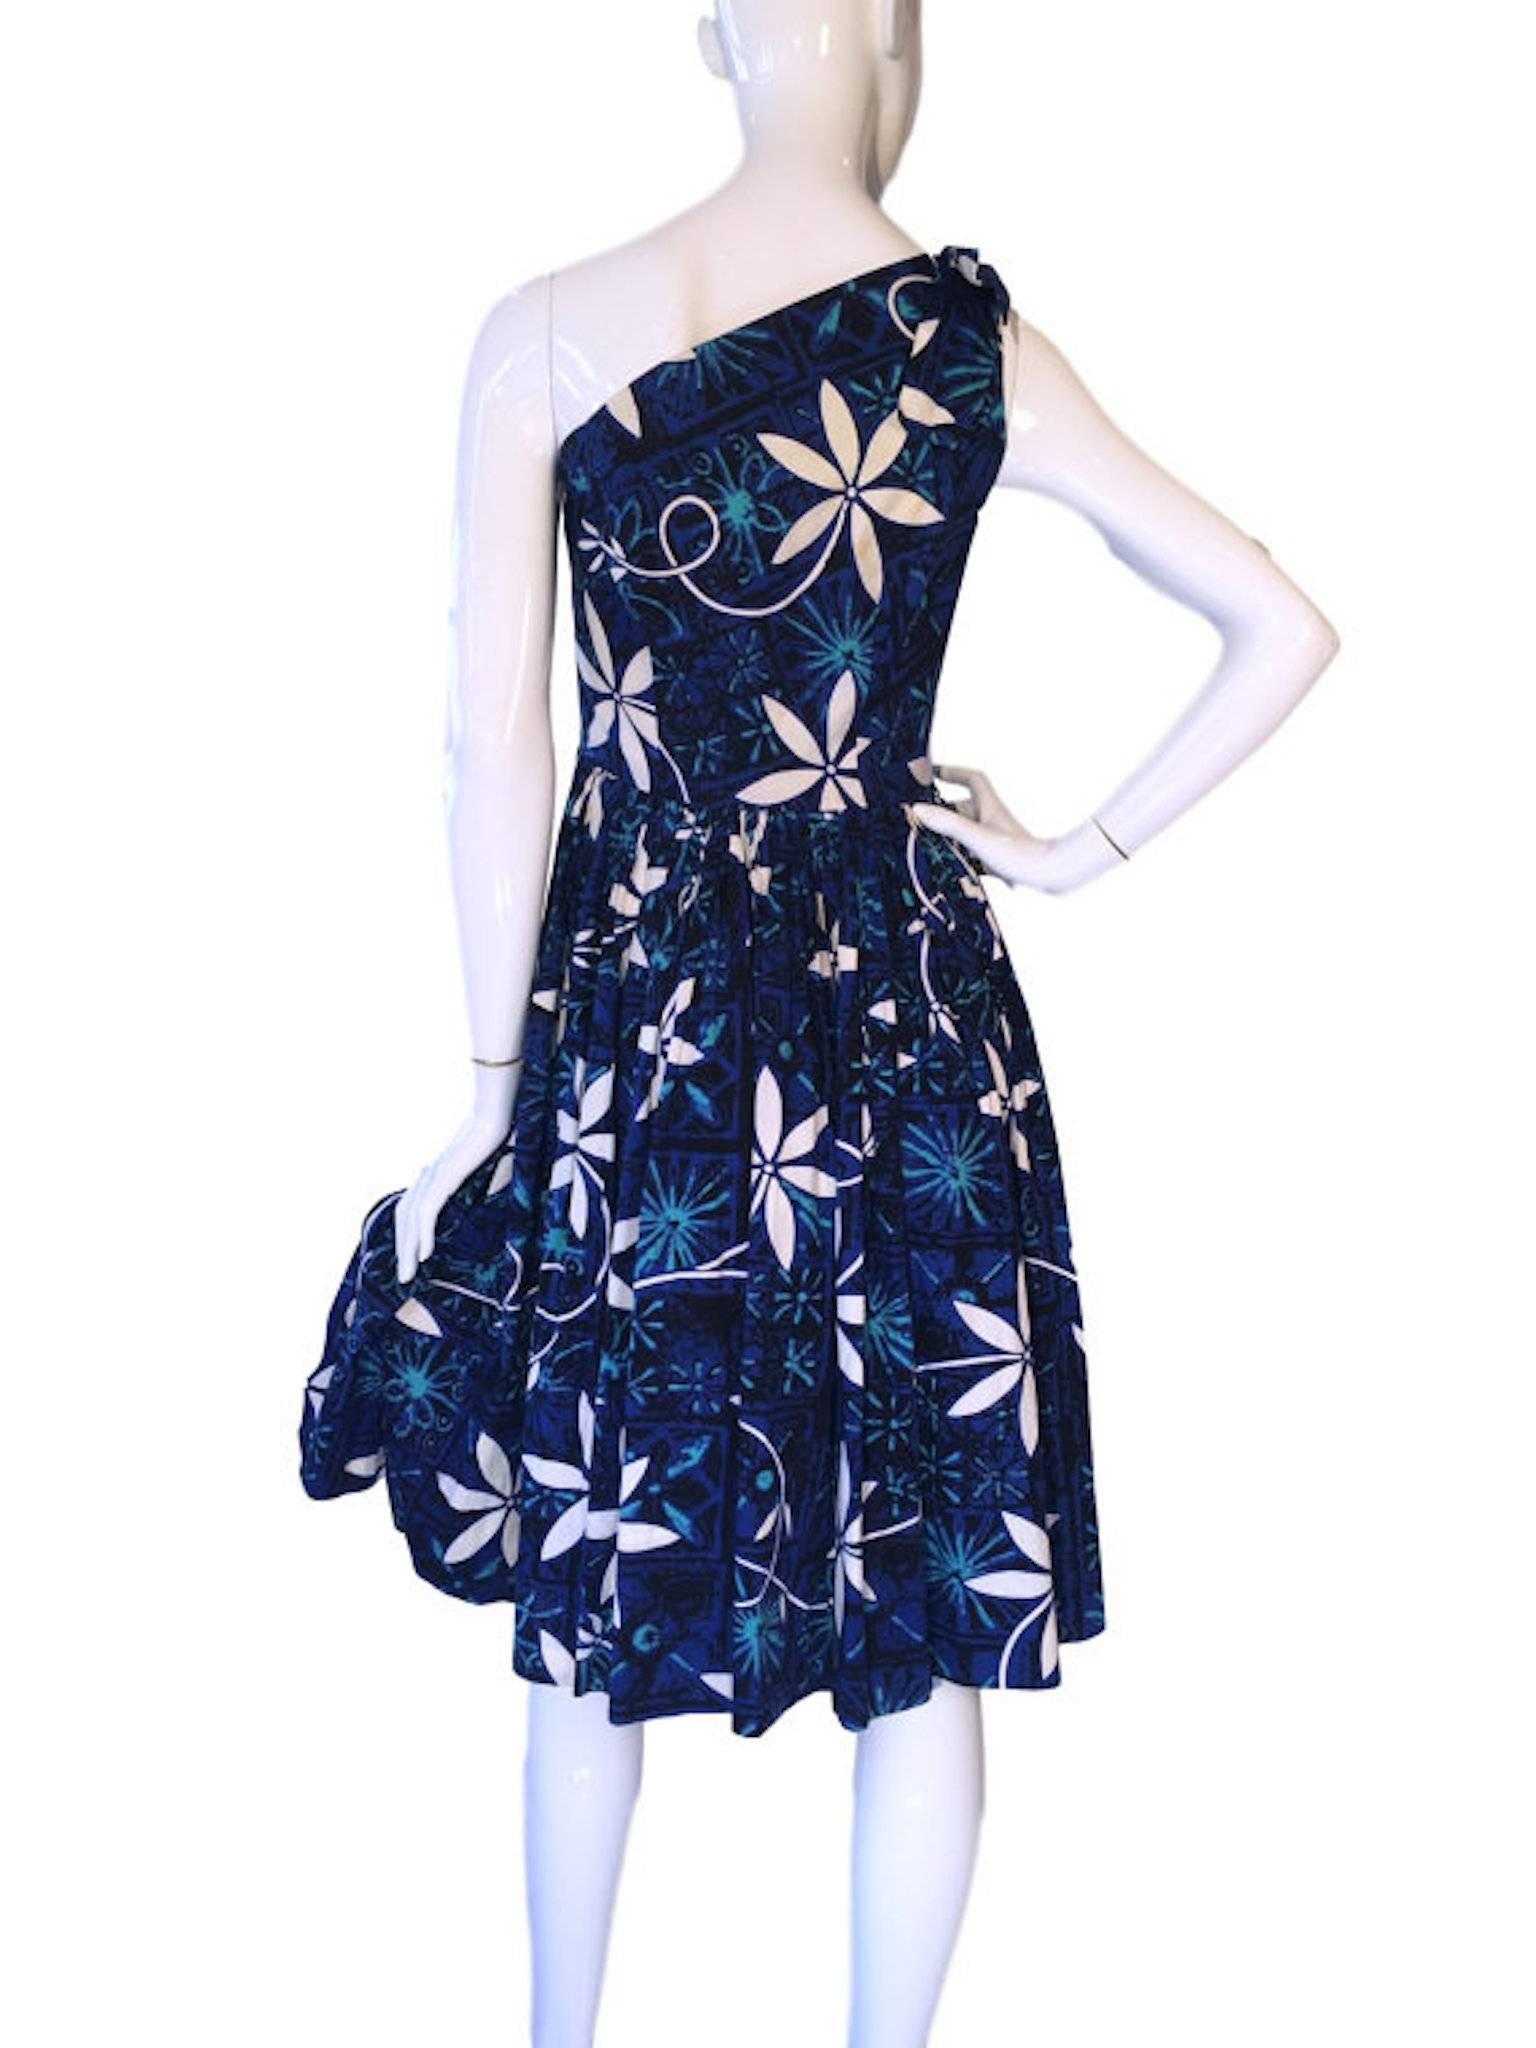 Alfred Shaheen Tiare Tapa print cotton sun dress. From the 1950s a print made famous by Elvis wearing a shirt on the cover of his Blue Hawaii album.

Size UK 8. Measuring 16 inches across bust and 48 inches length
